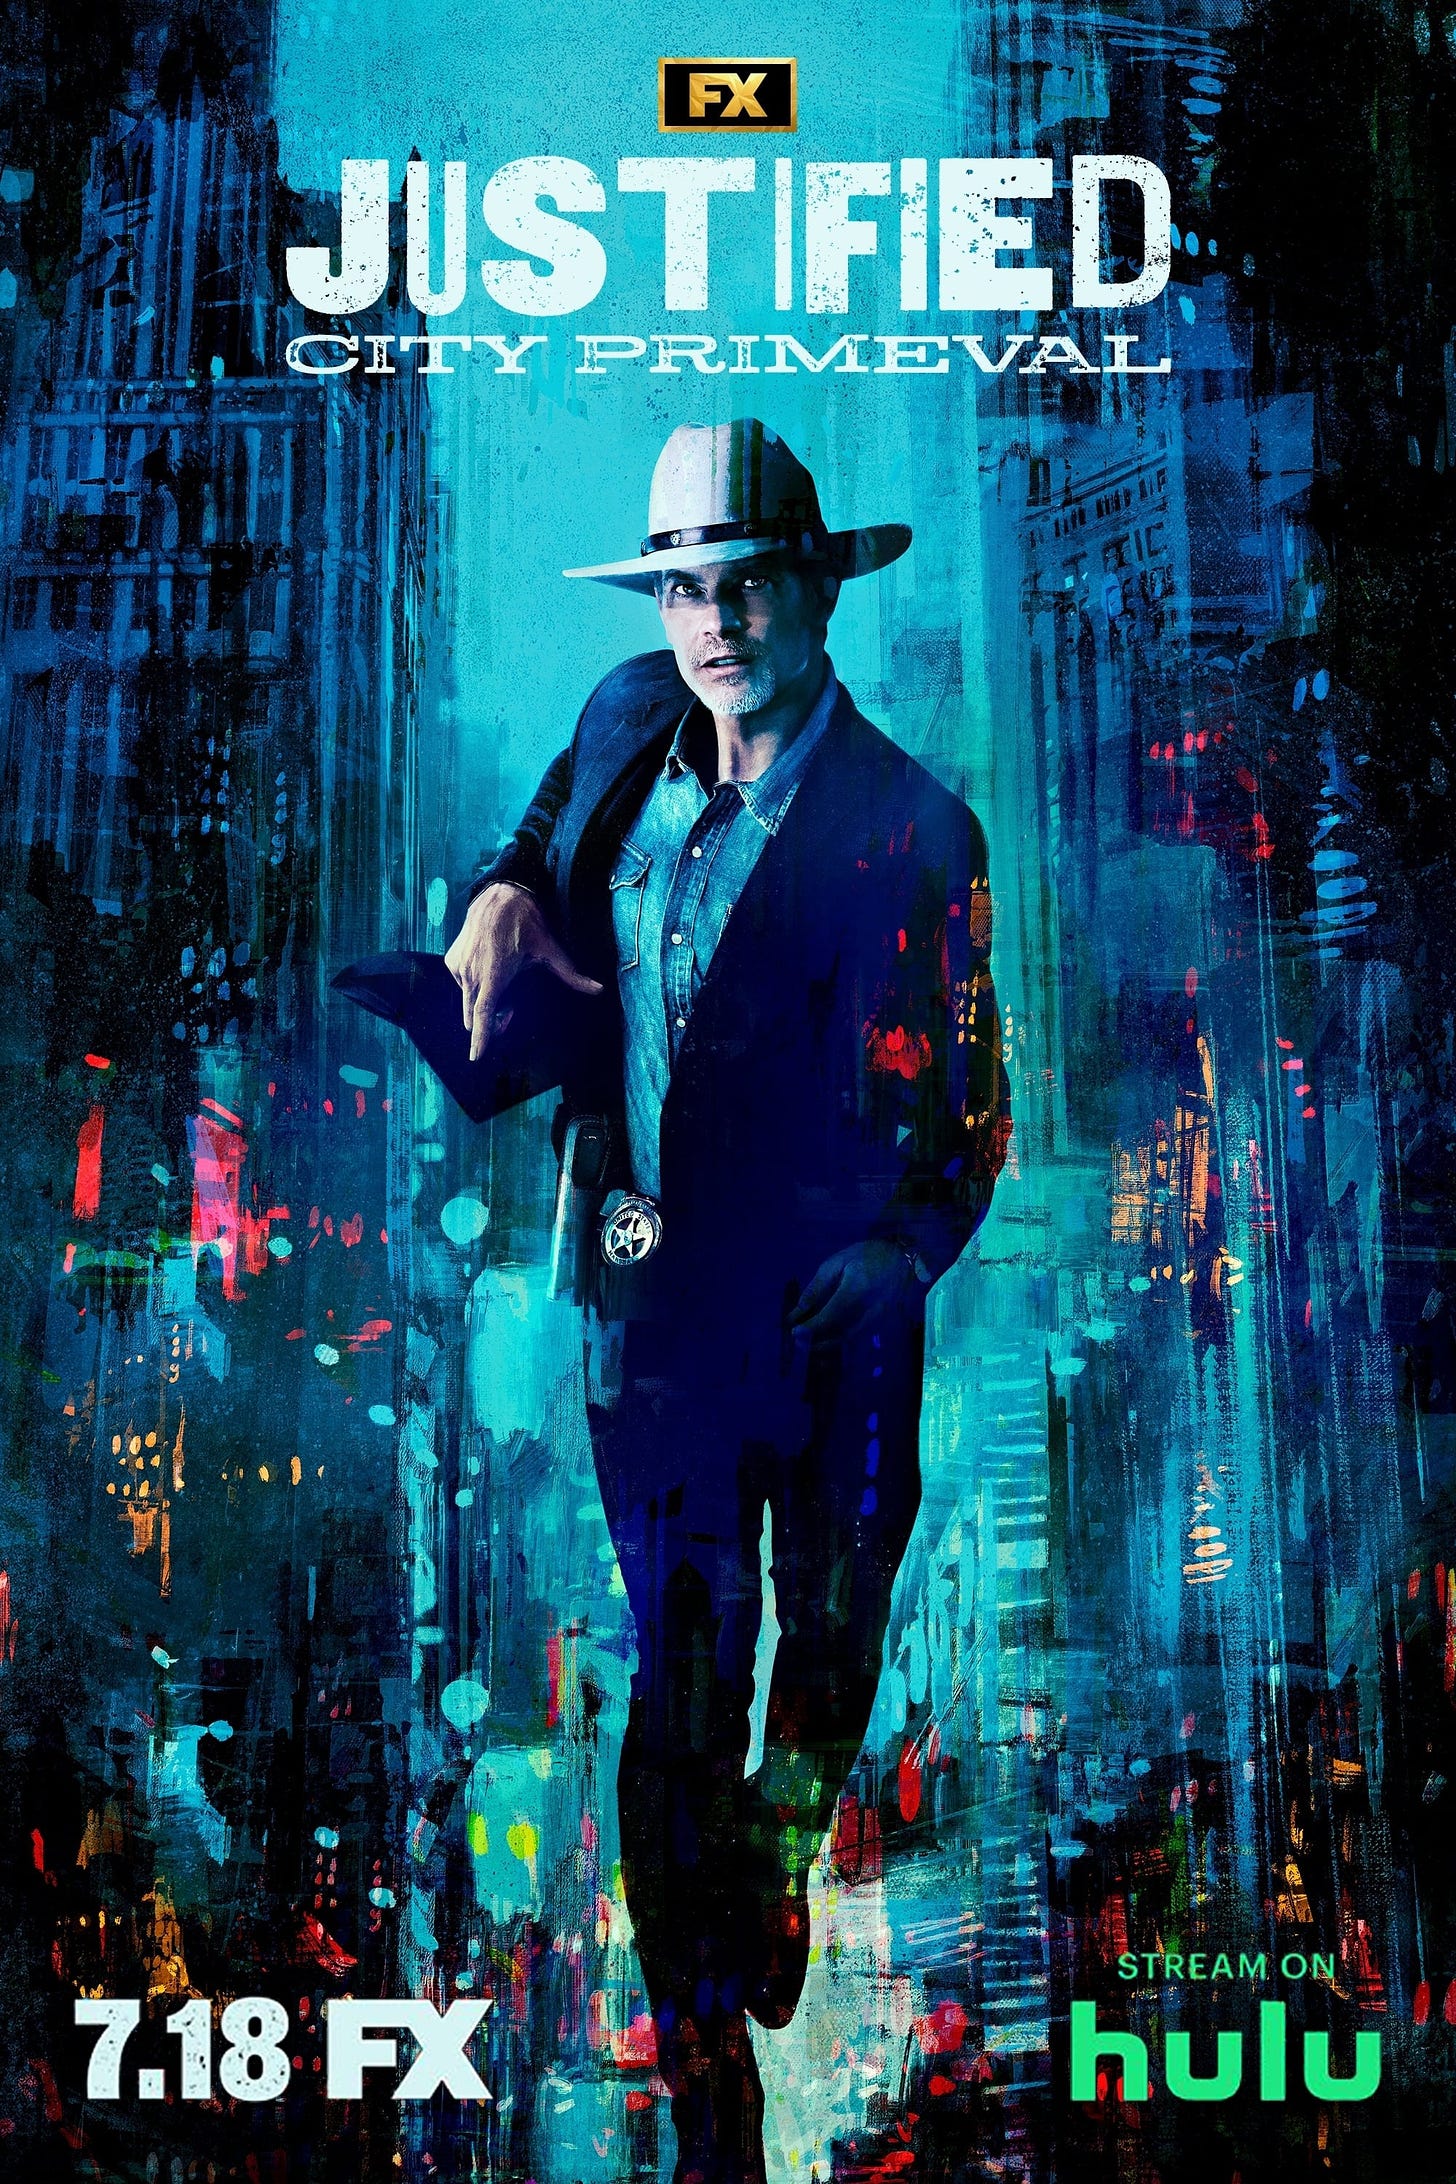 Justified City Primeval poster featuring Timothy Olyphant drawing a pistorl from his belt, wearing a blue suit and a cream cowboy hat